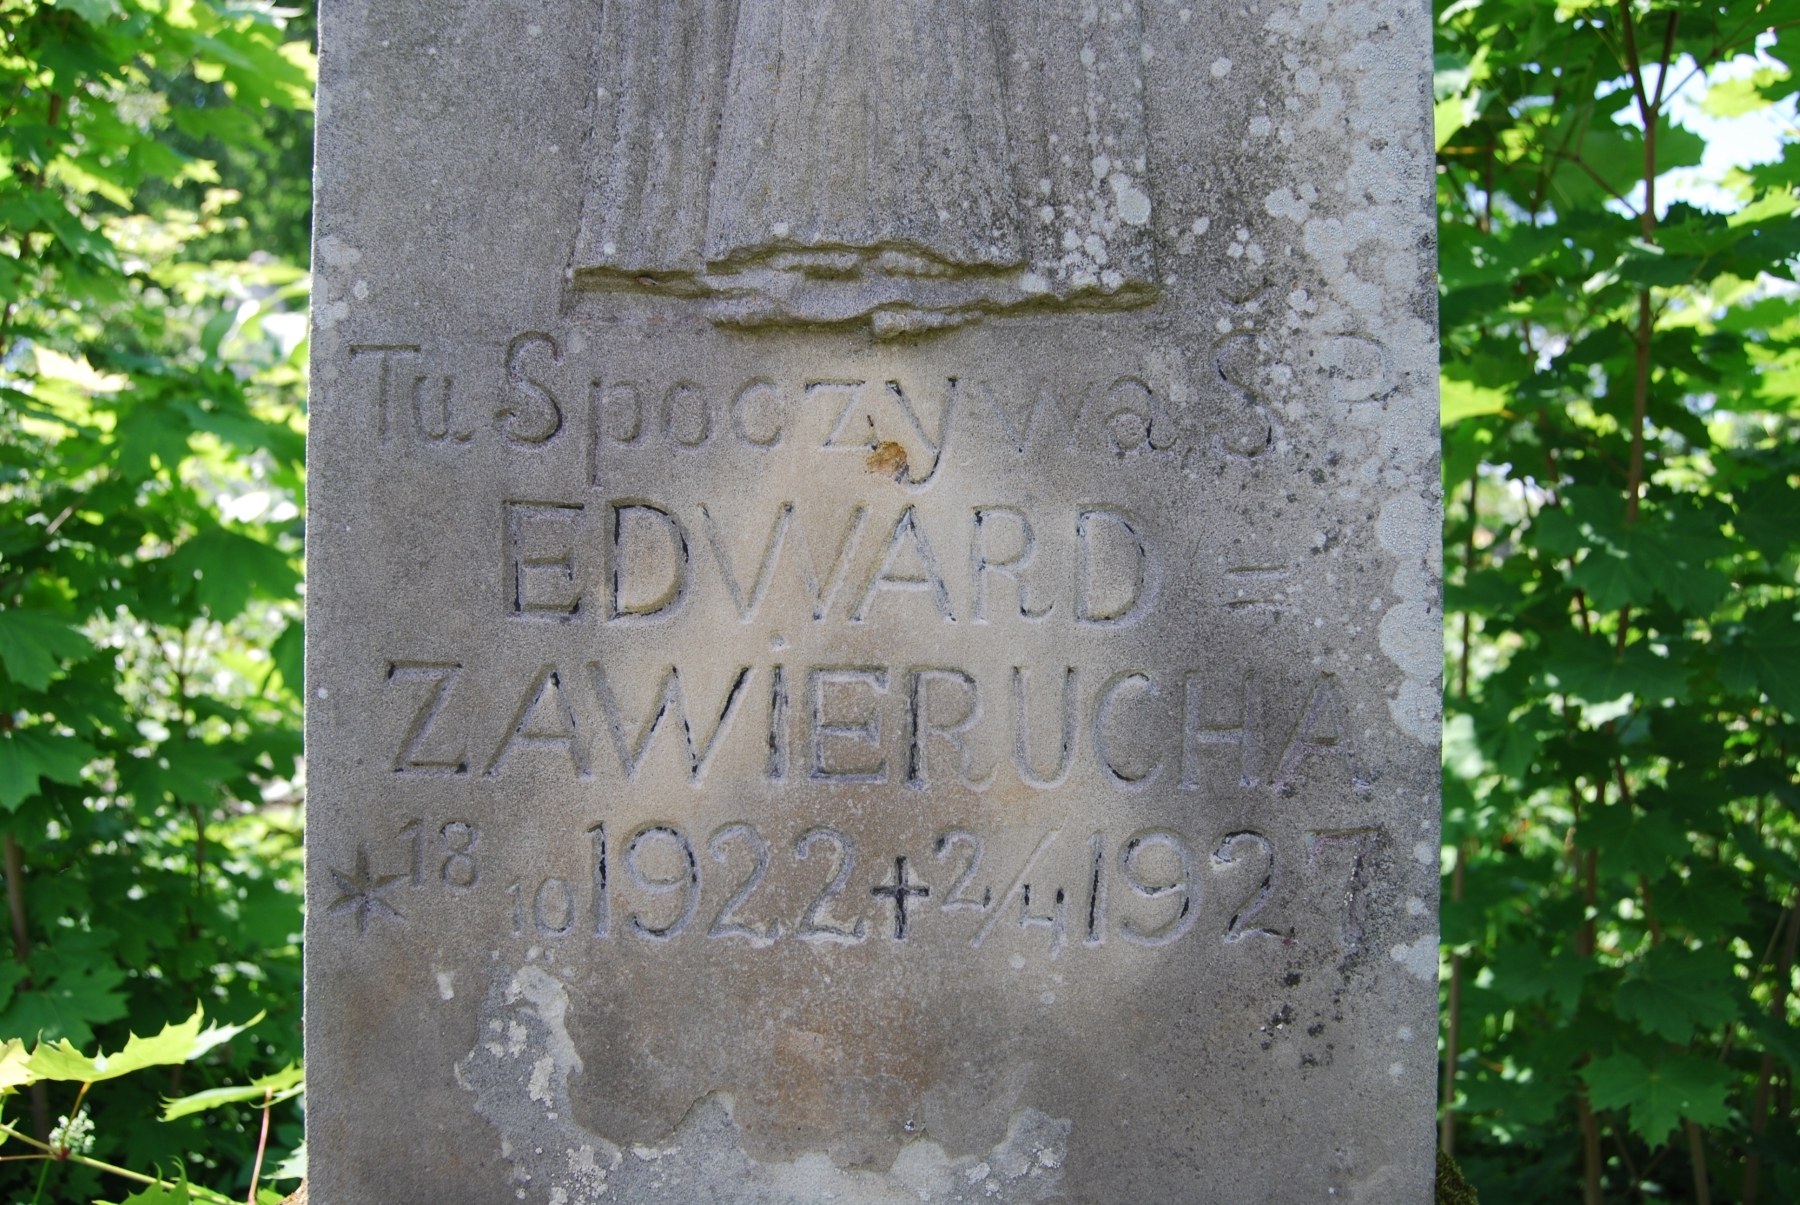 Fragment of the tombstone of Edward Zawierucha, Zbarazh cemetery, as of 2018